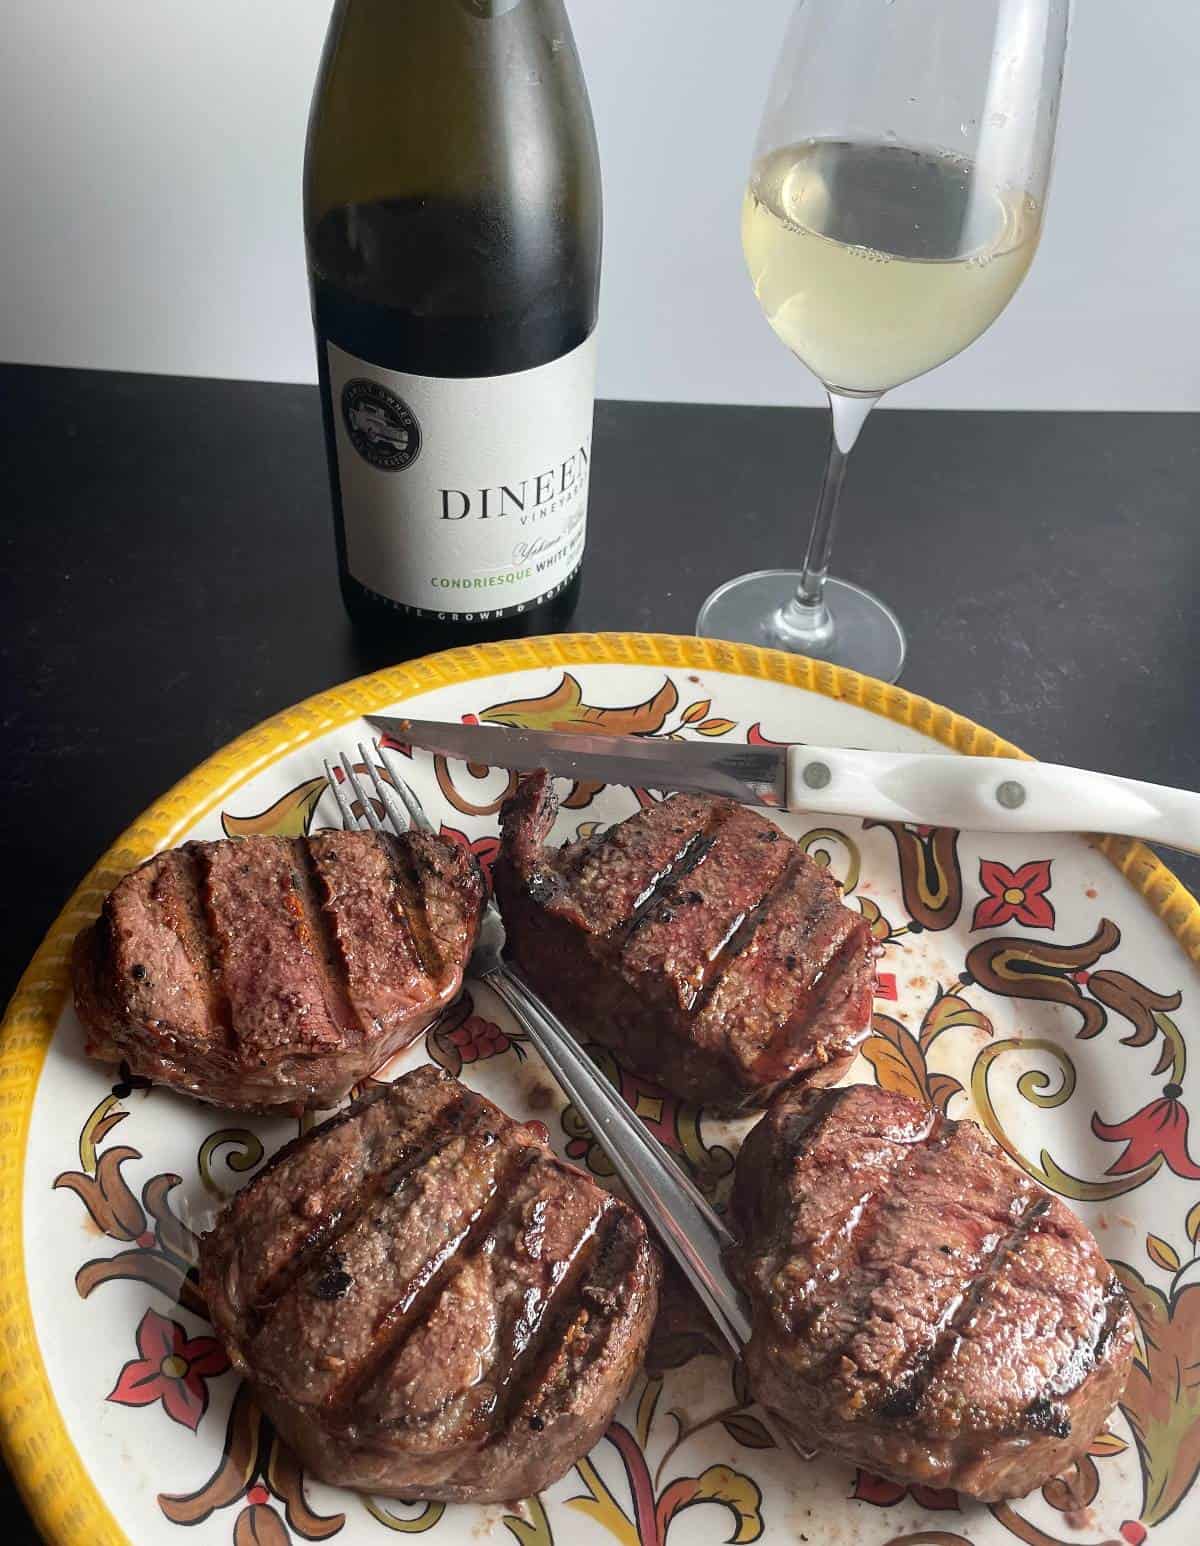 A platter of filet mignon with a bottle and glass of white wine in the background.